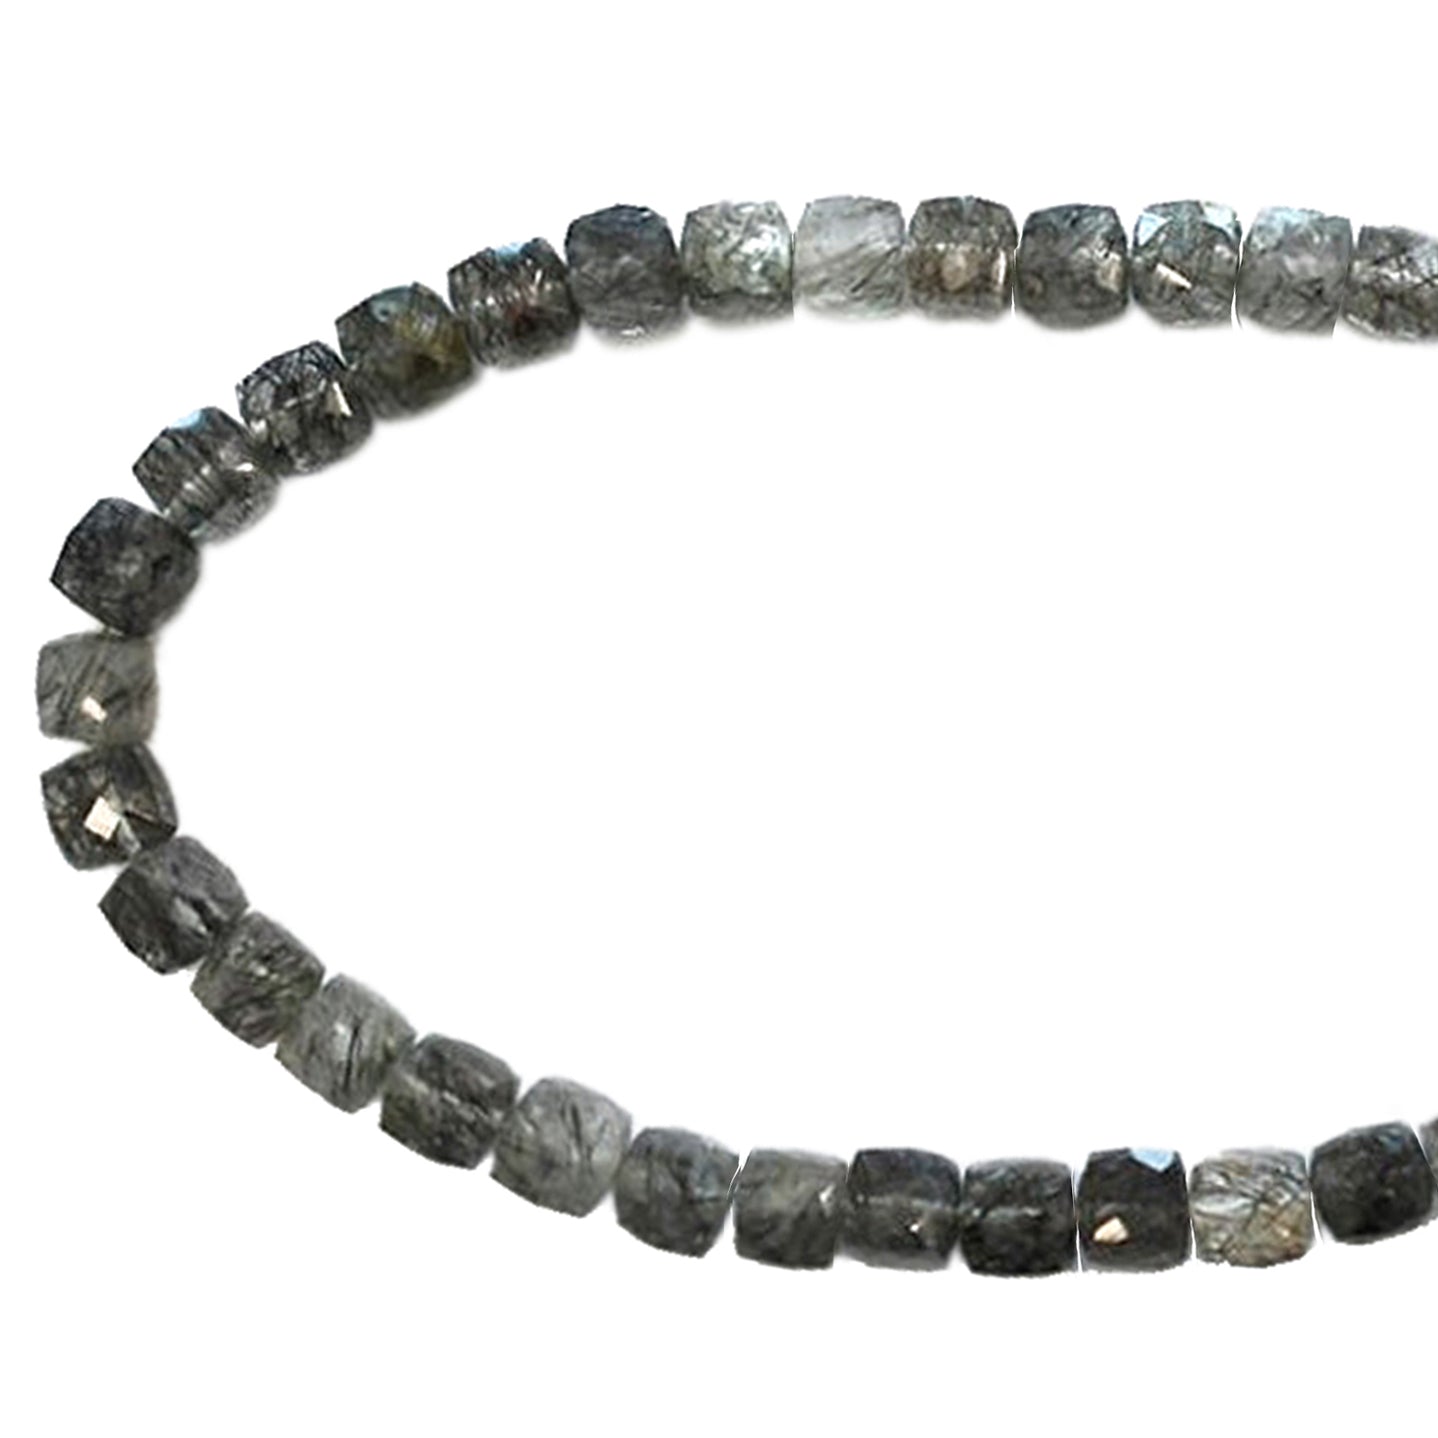 Black Rutilated Quartz 7 To 8 MM Faceted Cube Shape Beads Strand